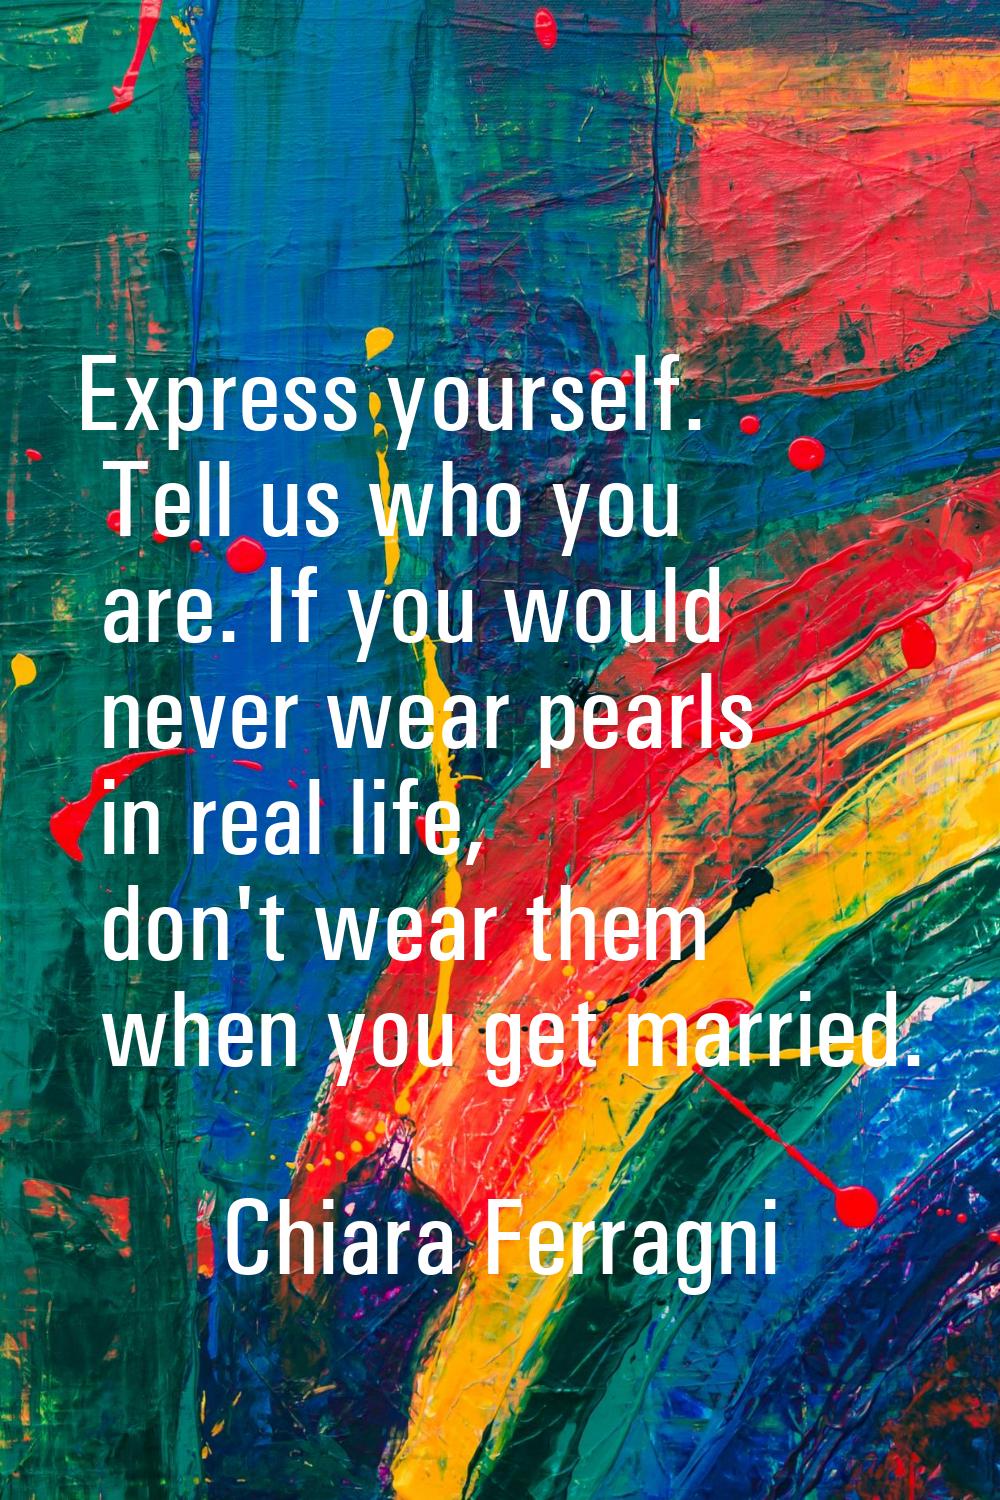 Express yourself. Tell us who you are. If you would never wear pearls in real life, don't wear them